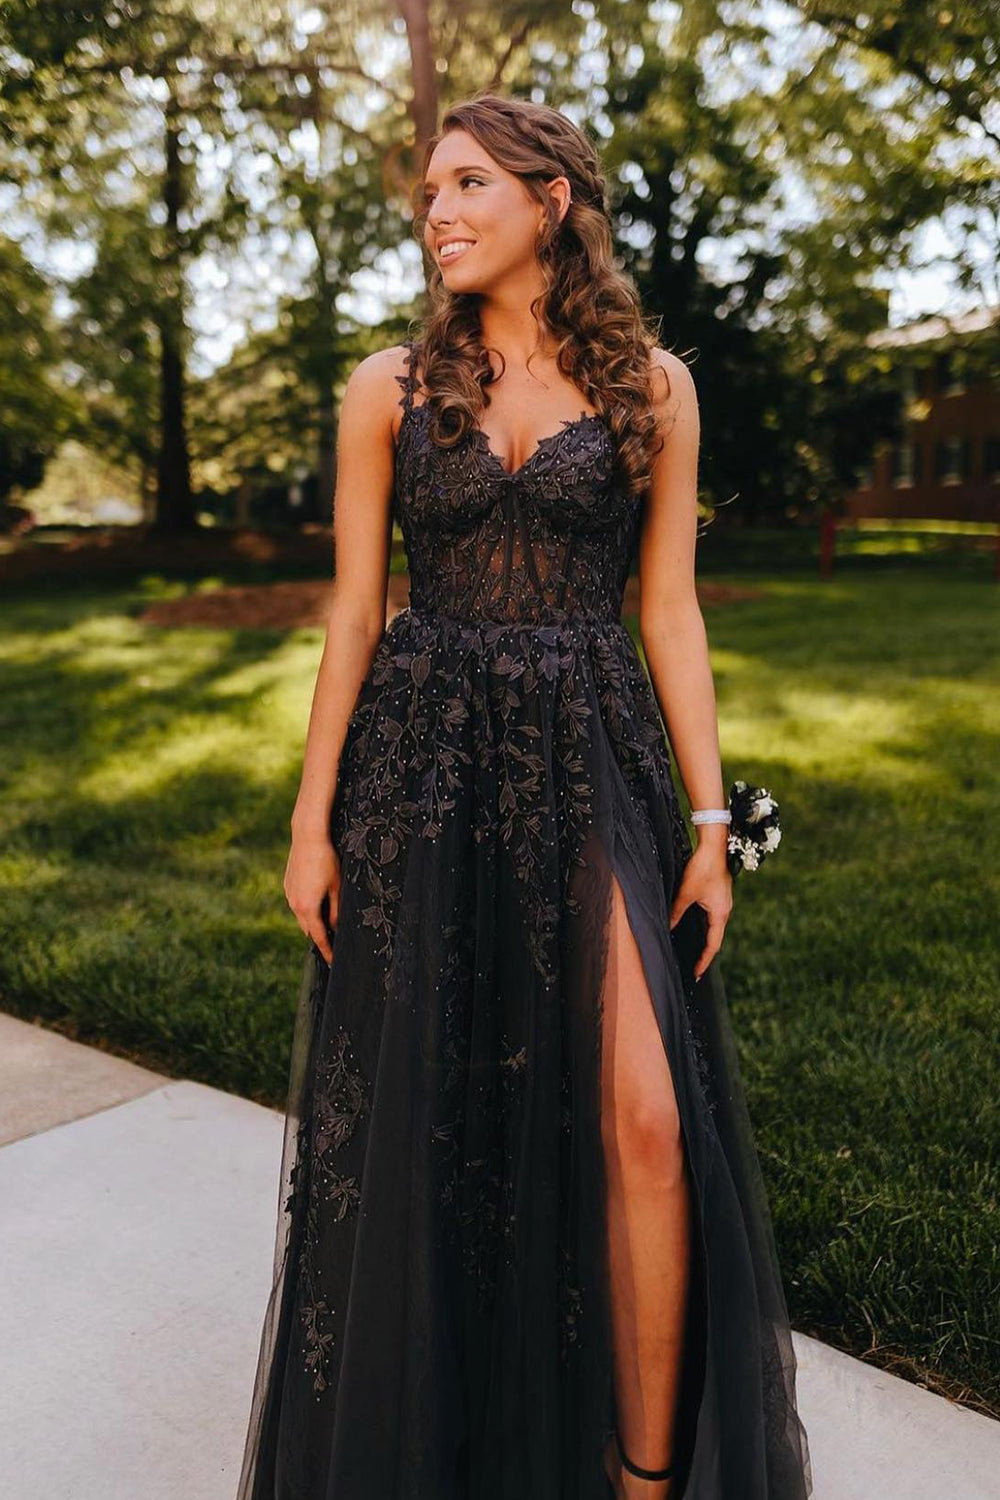 Black Off the Shoulder Corset Prom Dress with Appliques